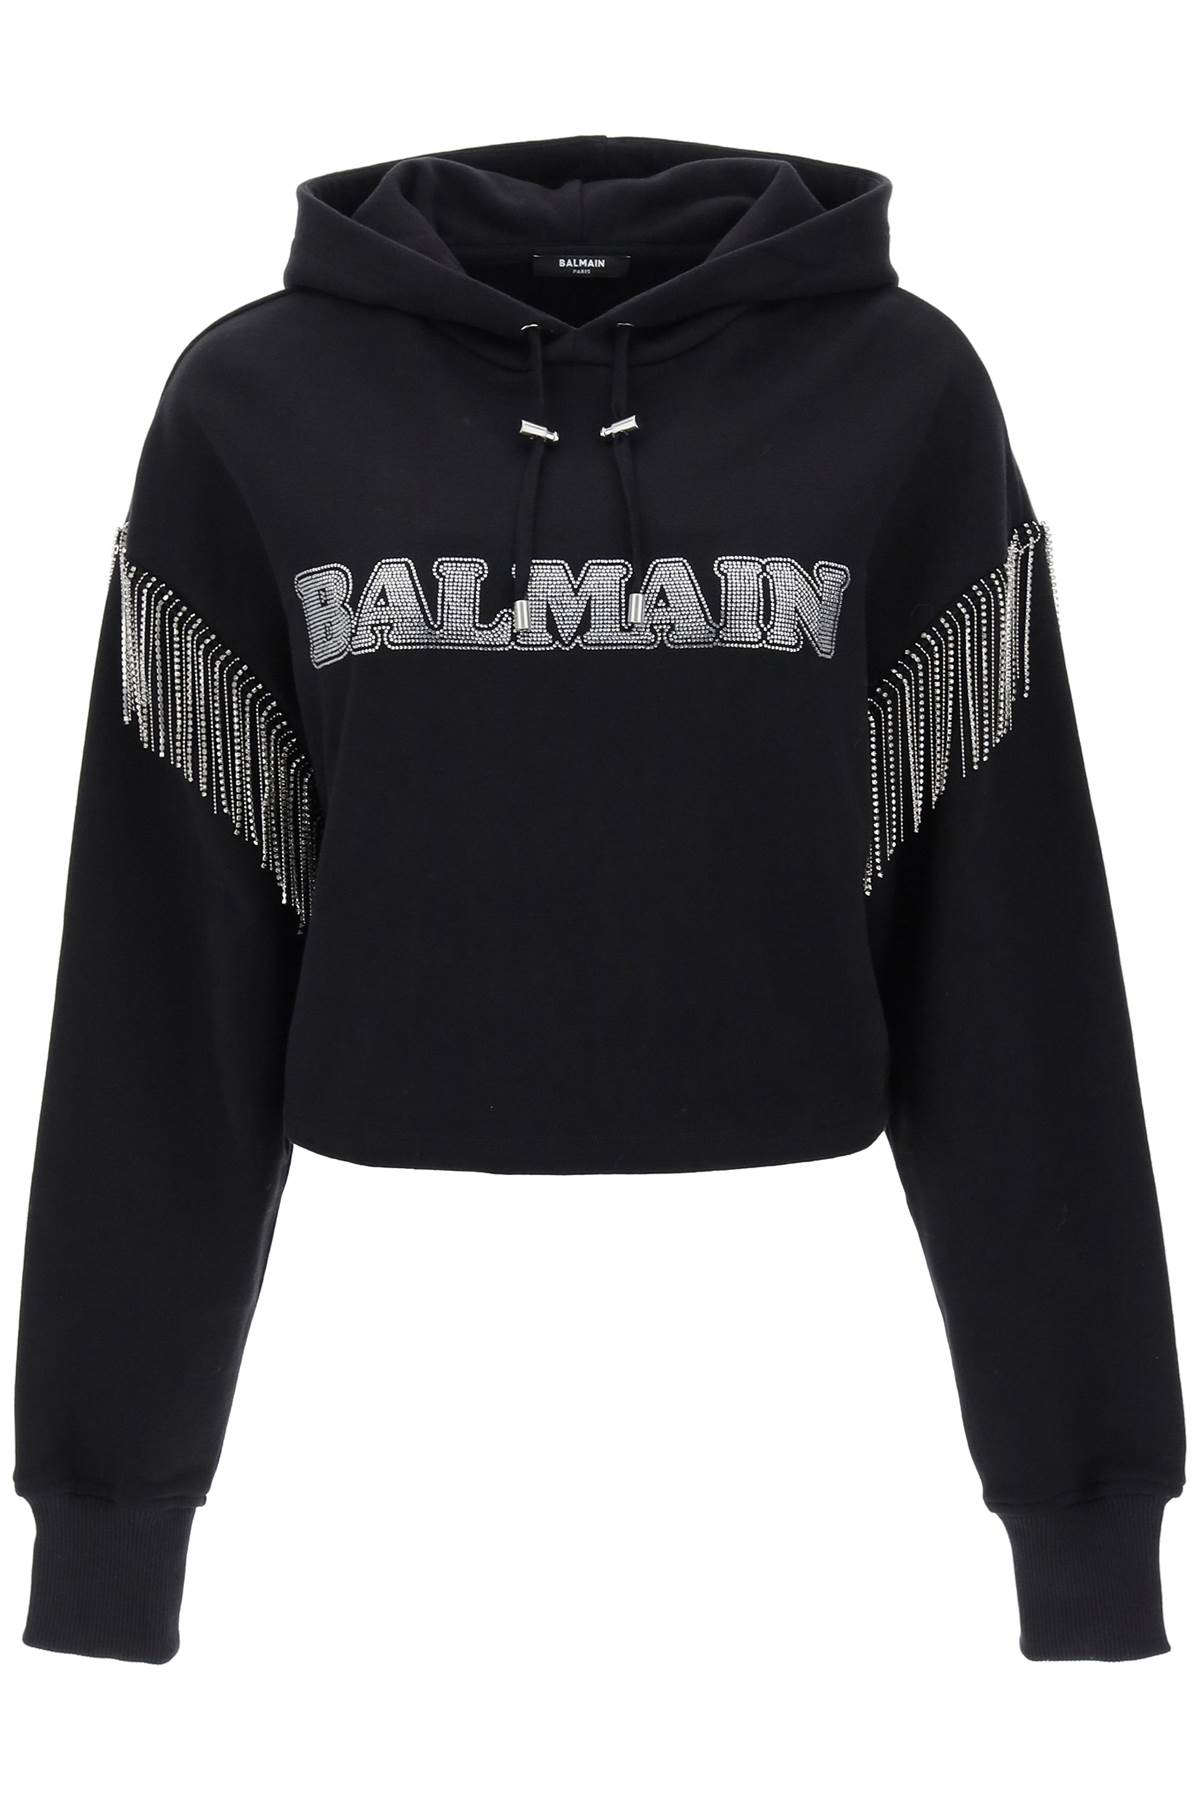 BALMAIN CROPPED HOODIE WITH RHINESTONE-STUDDED LOGO AND CRYSTAL CUPCHAINS